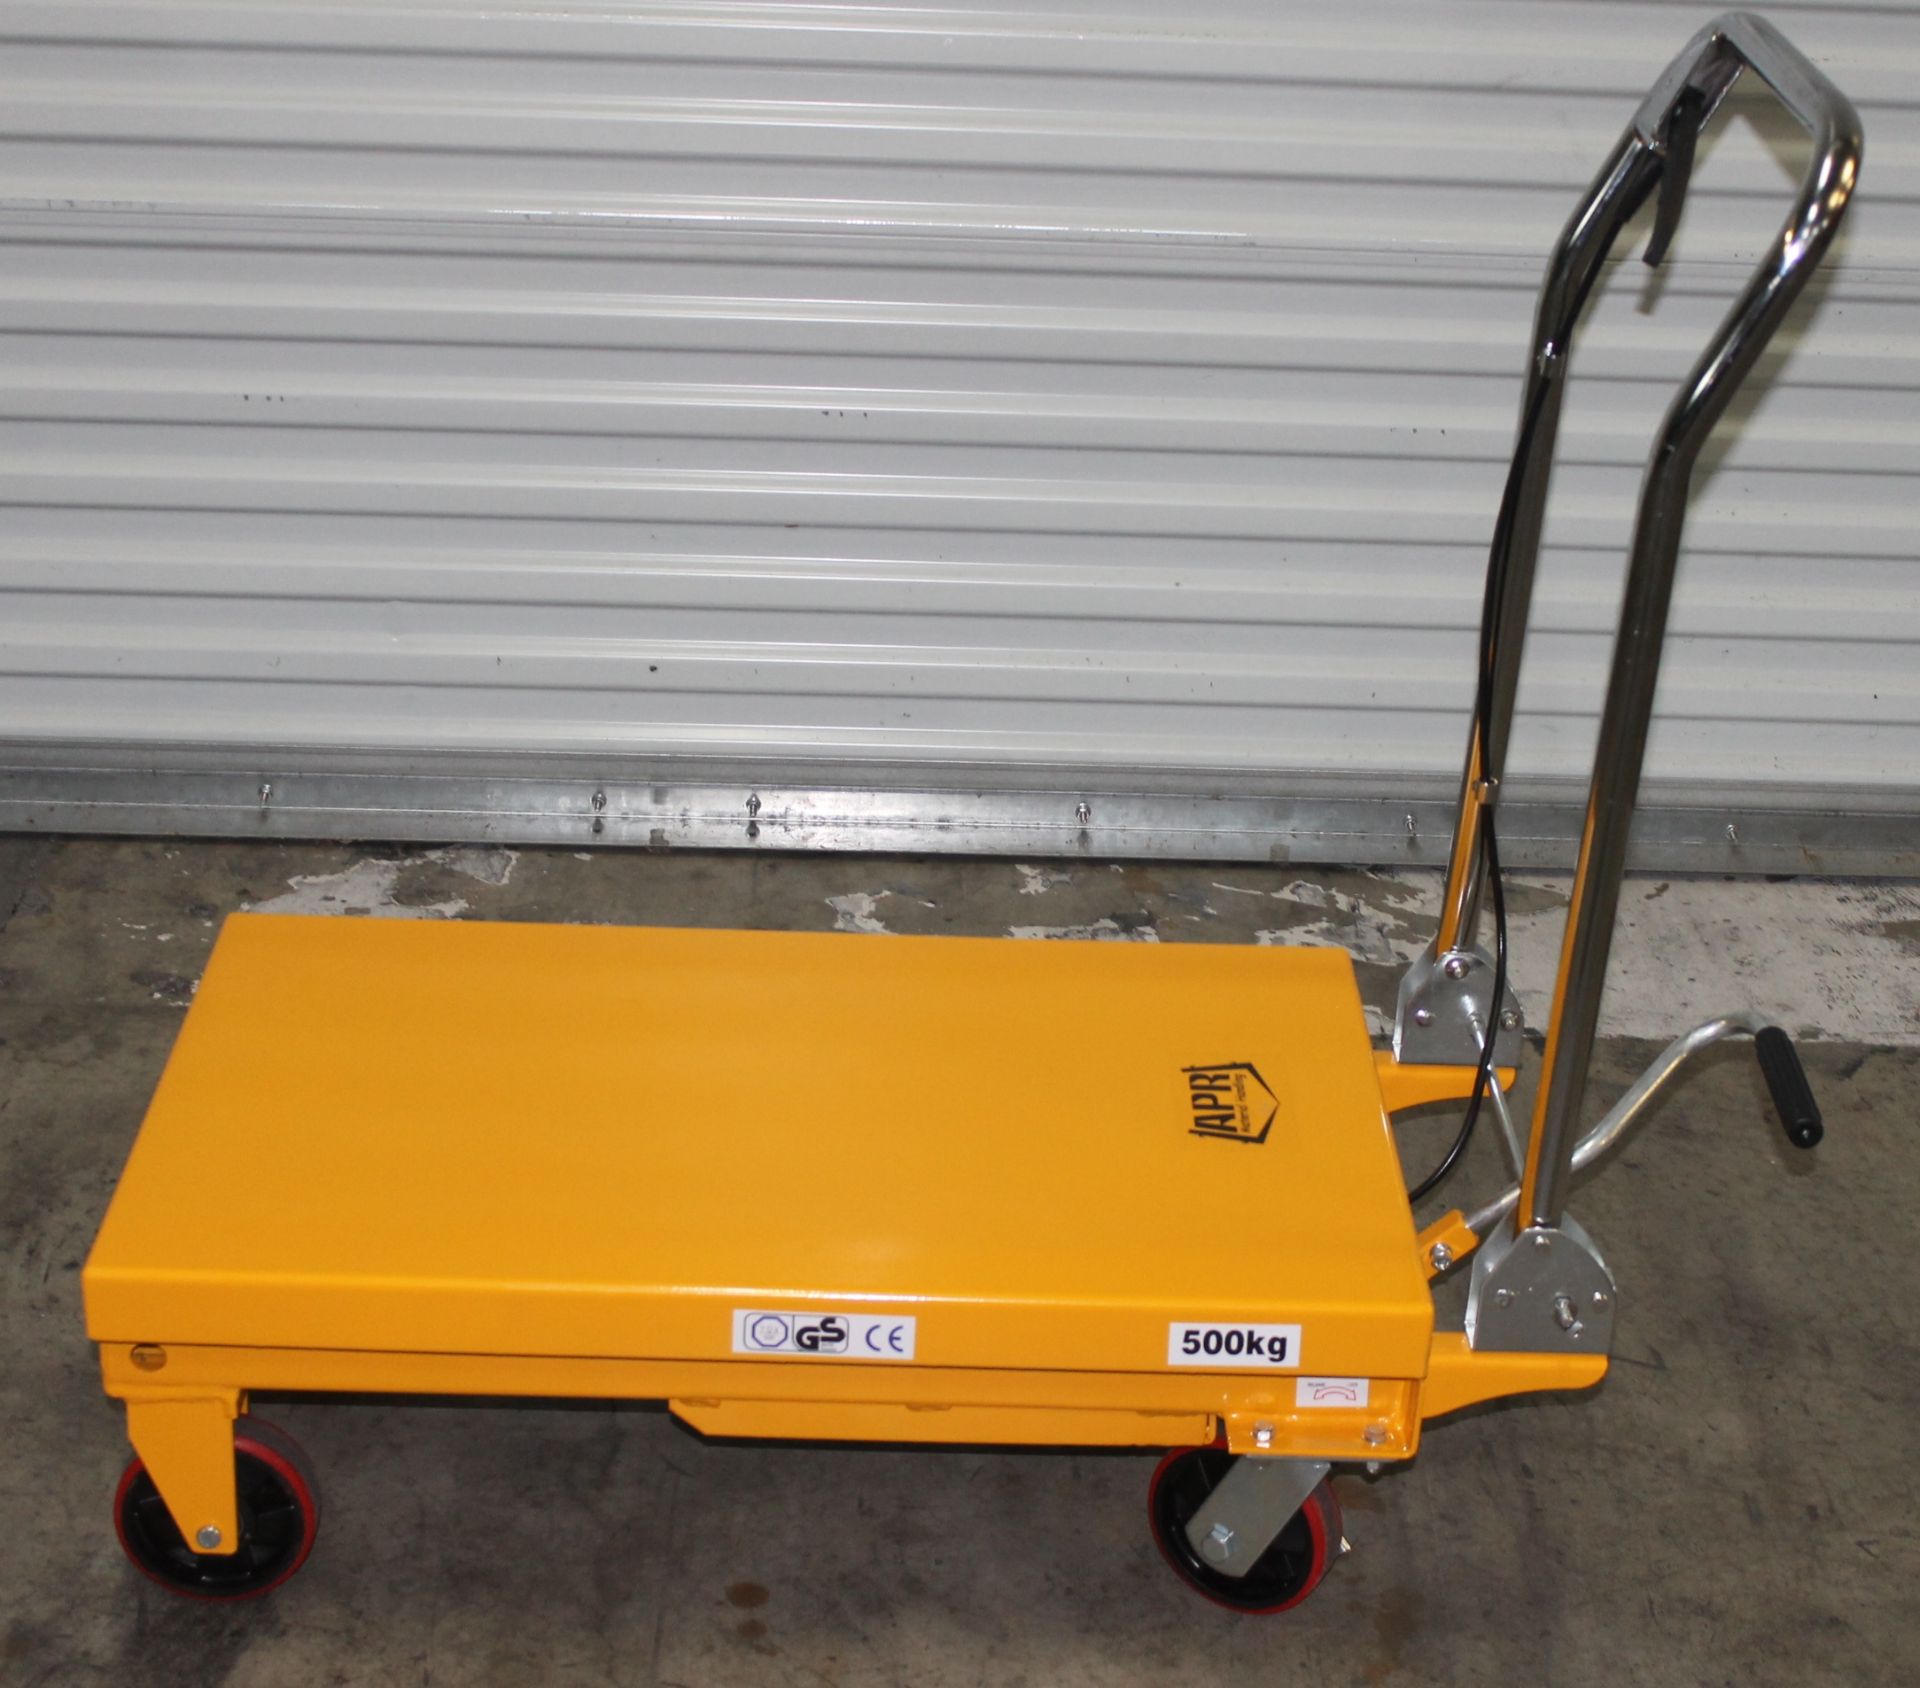 1102 LBS CAP. ROLLING SCISSOR LIFT TABLE, CAPACITY: 1102 LBS., MAX HEIGHT: 22", TABLE SIZE: 33.66" - Image 2 of 7